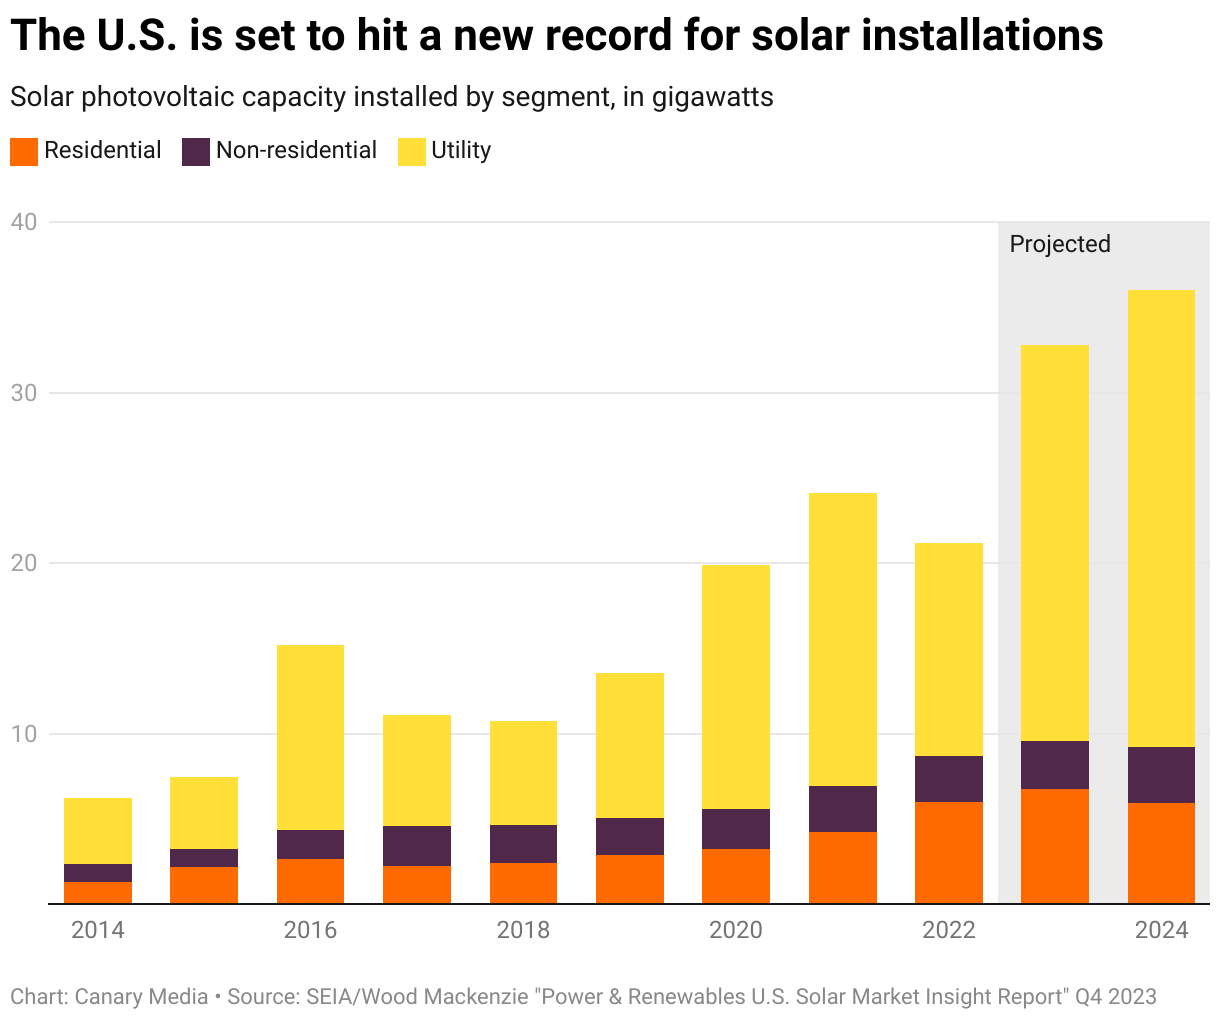 the-u.s.-is-set-to-hit-a-new-record-for-solar-installations.png